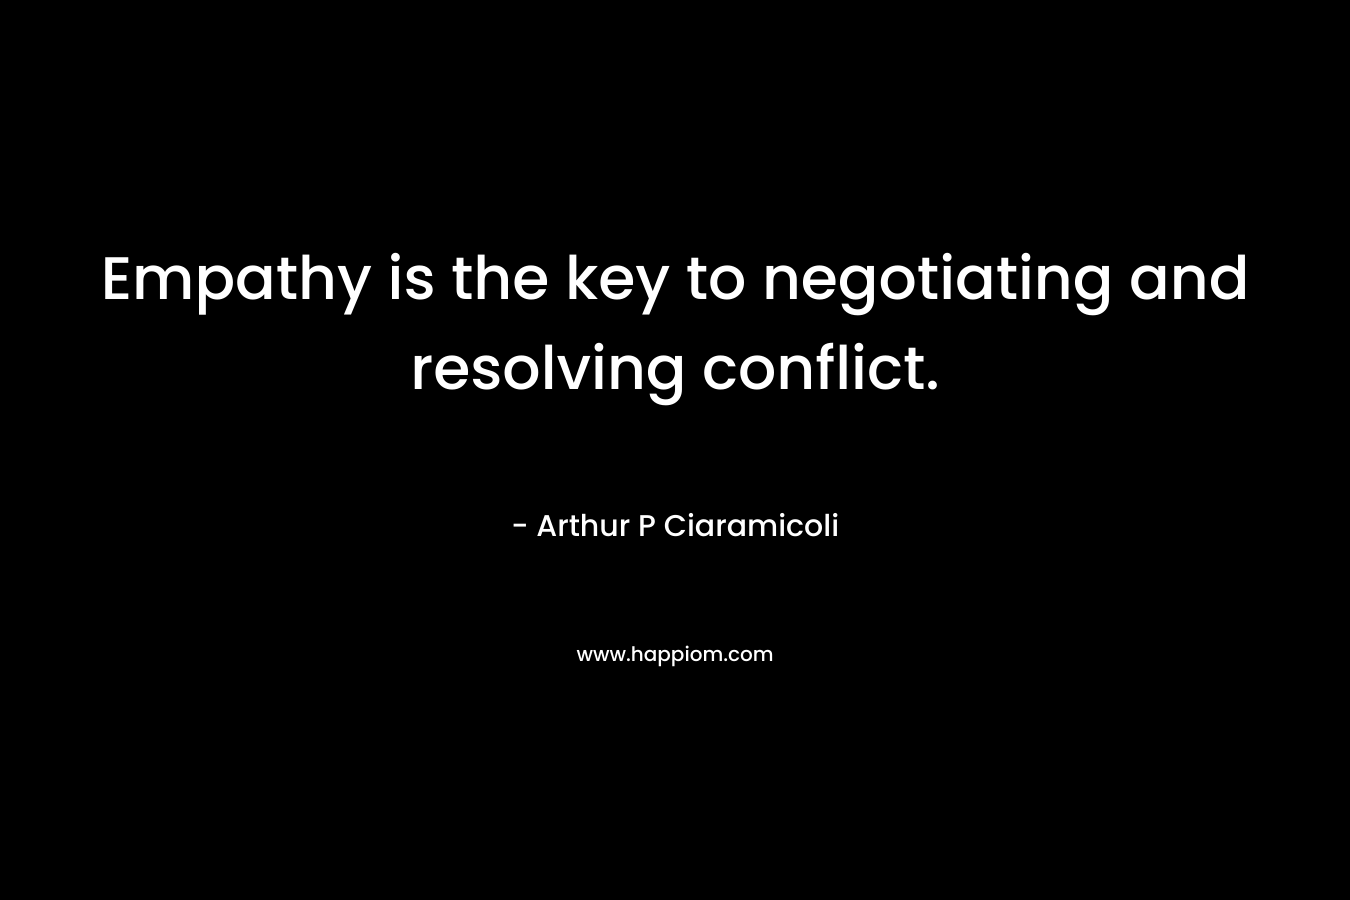 Empathy is the key to negotiating and resolving conflict. – Arthur P Ciaramicoli